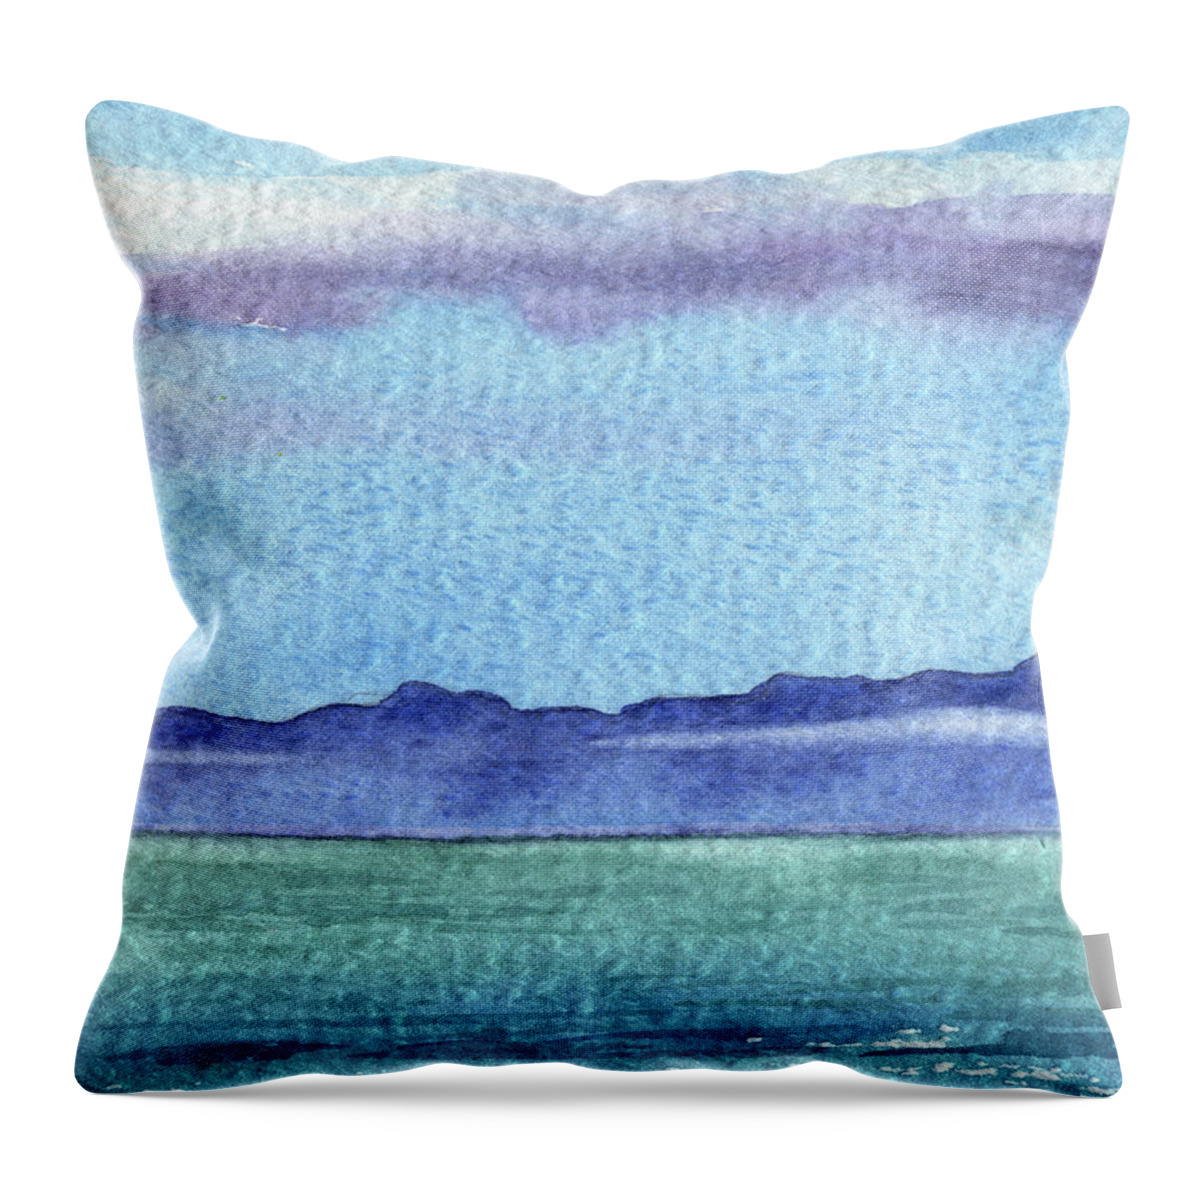 Mountain Lake Throw Pillow featuring the painting Peaceful Seascape Watercolor Lake With Mountains And Clouds by Irina Sztukowski